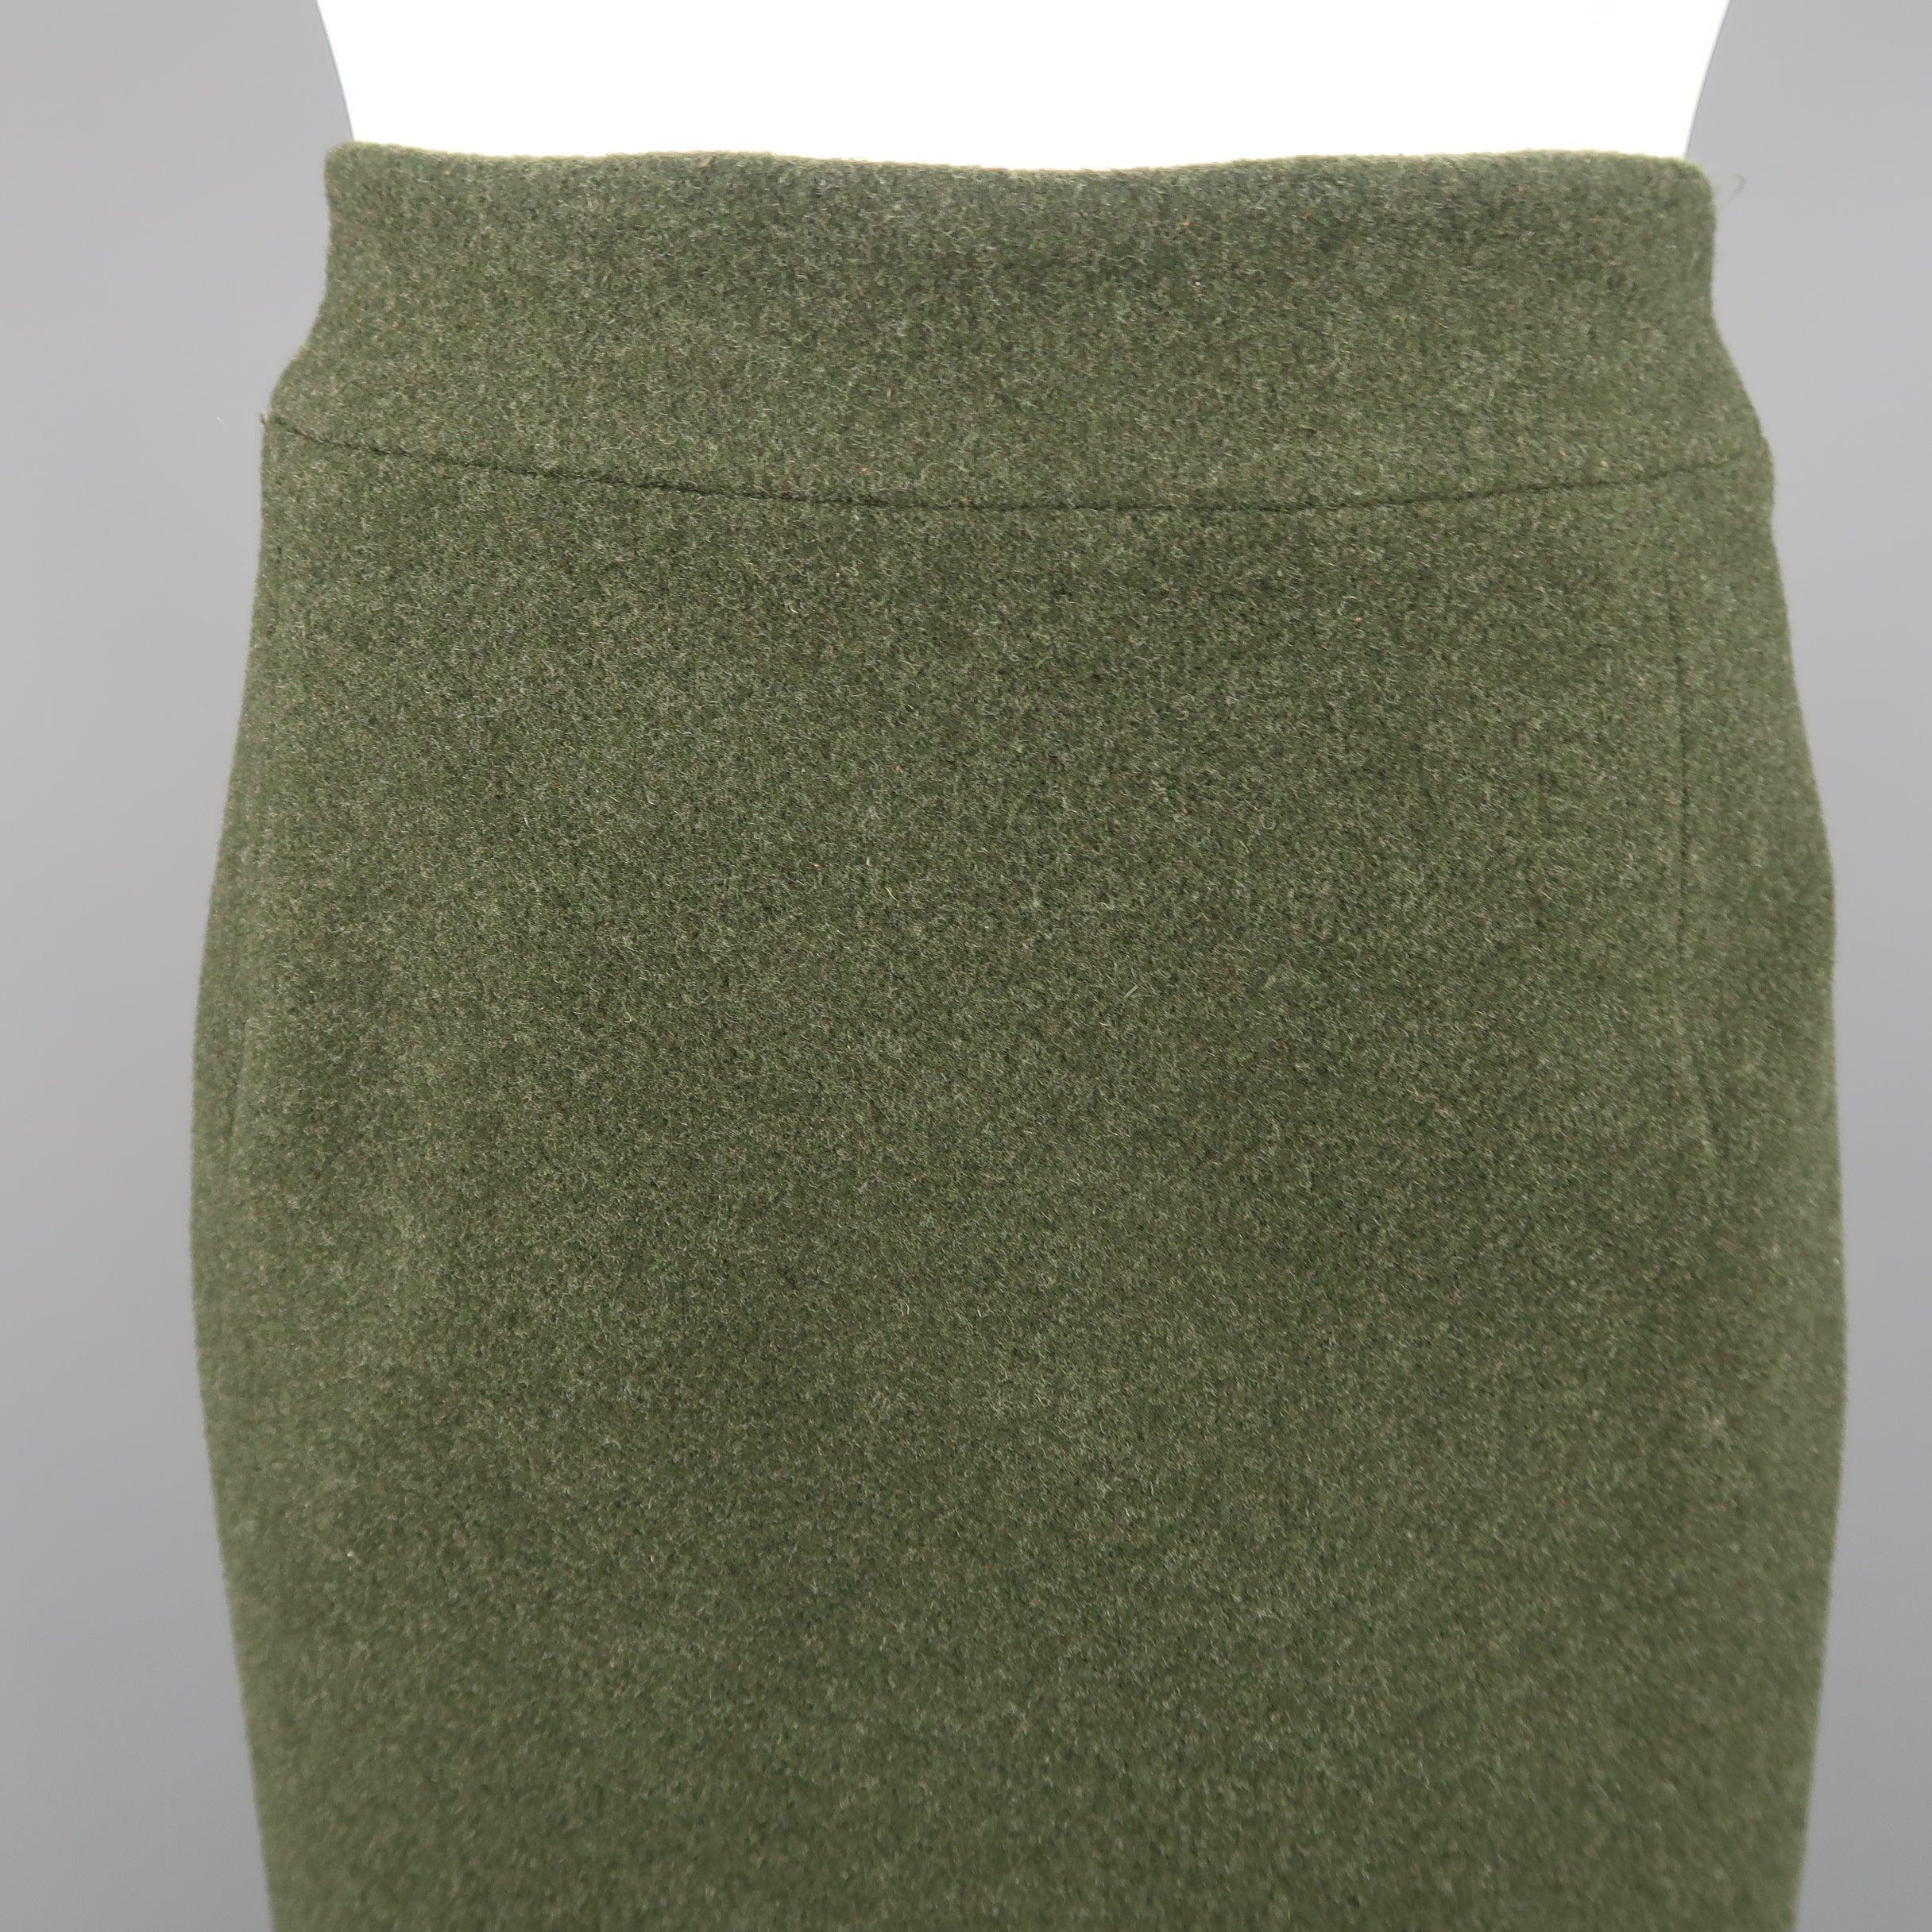 Vintage COLLECTION by RALPH LAUREN skirt comes in forest green wool cashmere blend felt with an A line shape and darted waist. Matching jacket sold separately. Made in USA.
Excellent Pre-Owned Condition.
 

Marked:   8
 

Measurements: 
  
l	Waist: